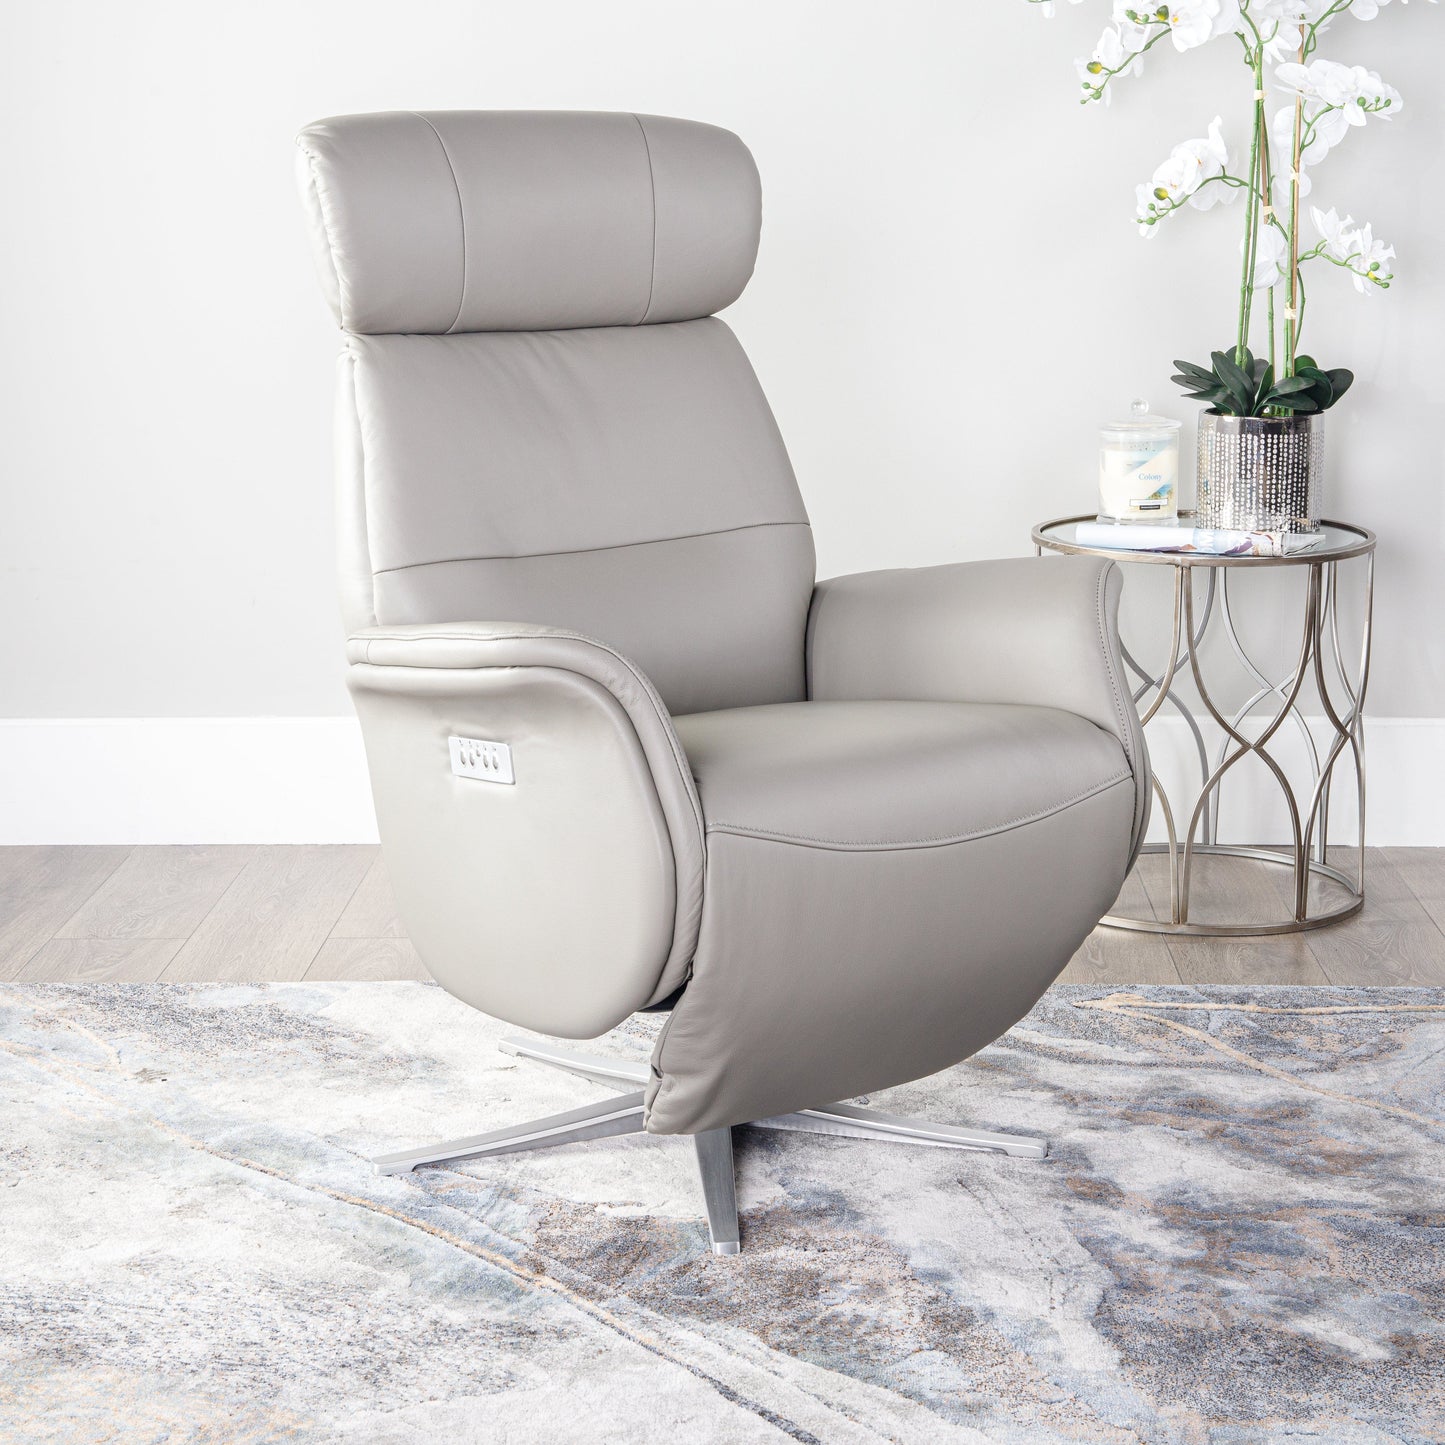 Furniture  -  Detroit Husky Leather Electric Reclining Chair  -  60004235